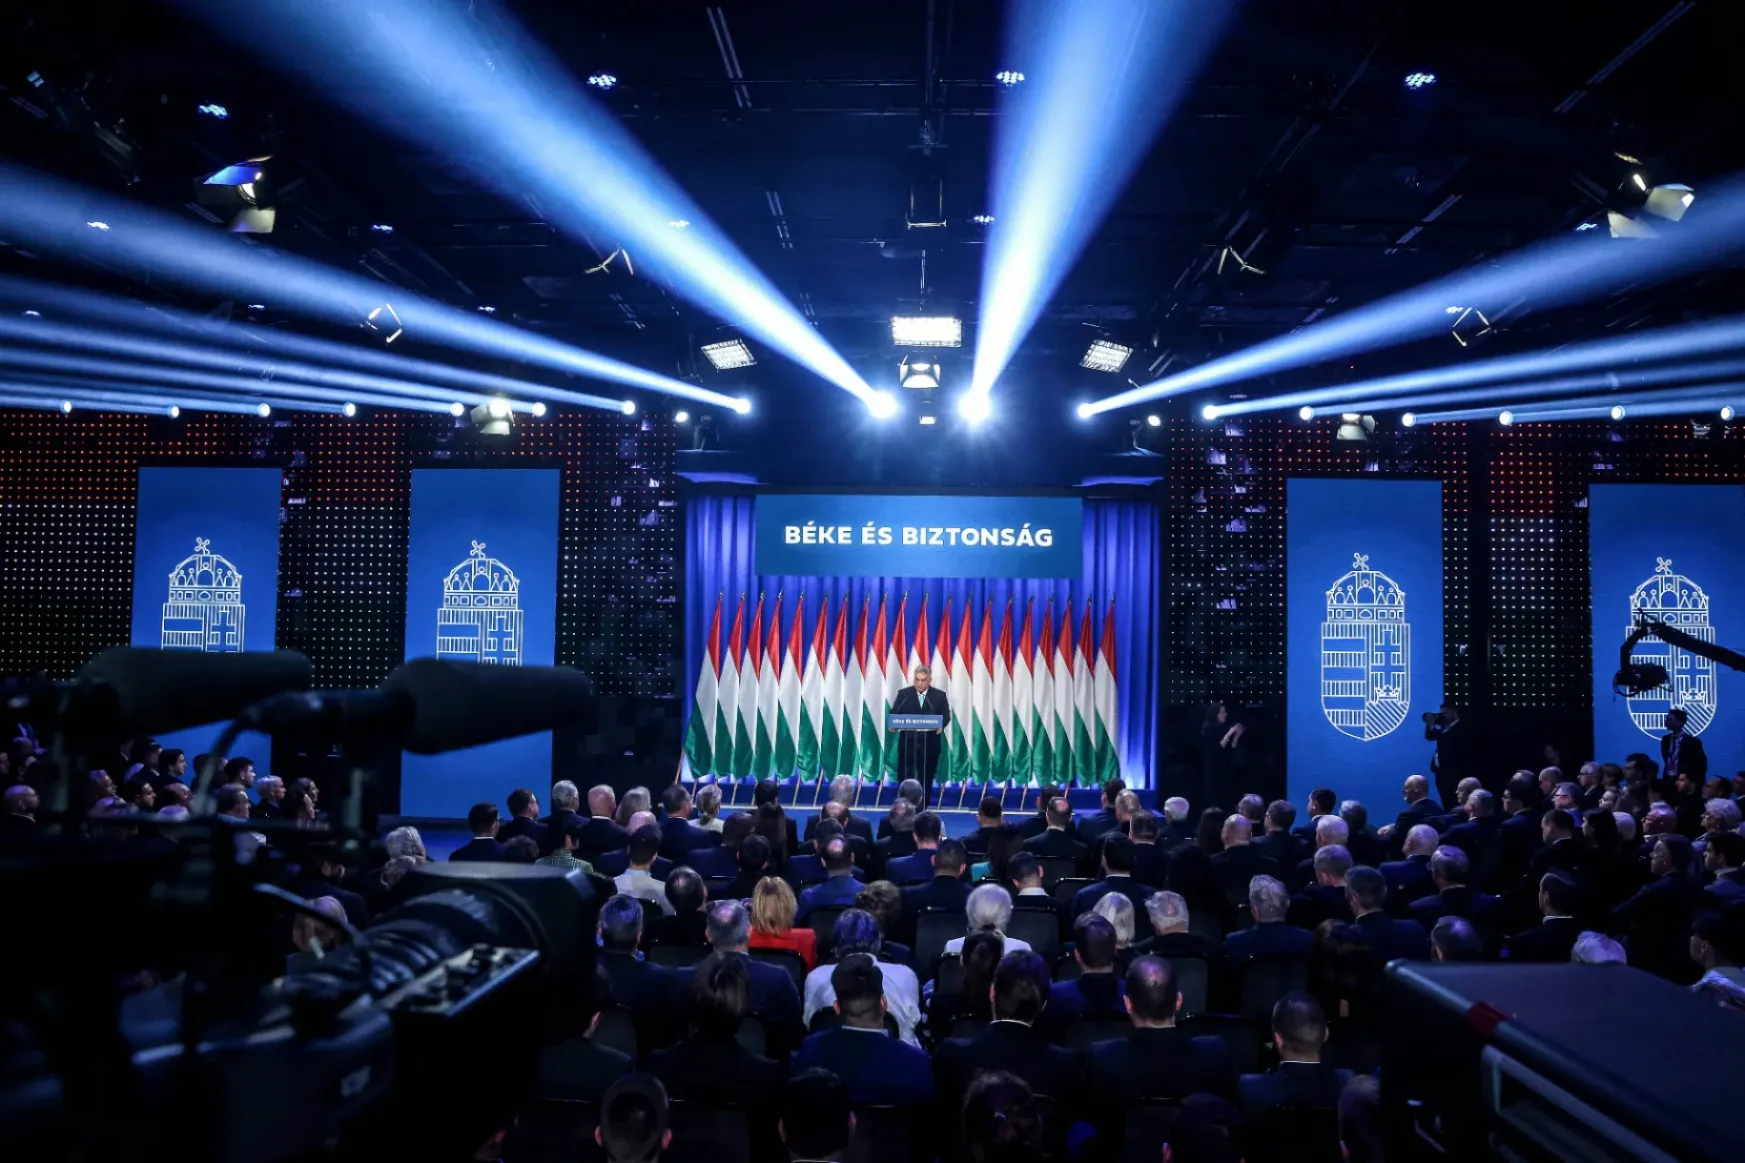 Five strong sentences from Viktor Orbán's annual State of the Nation speech